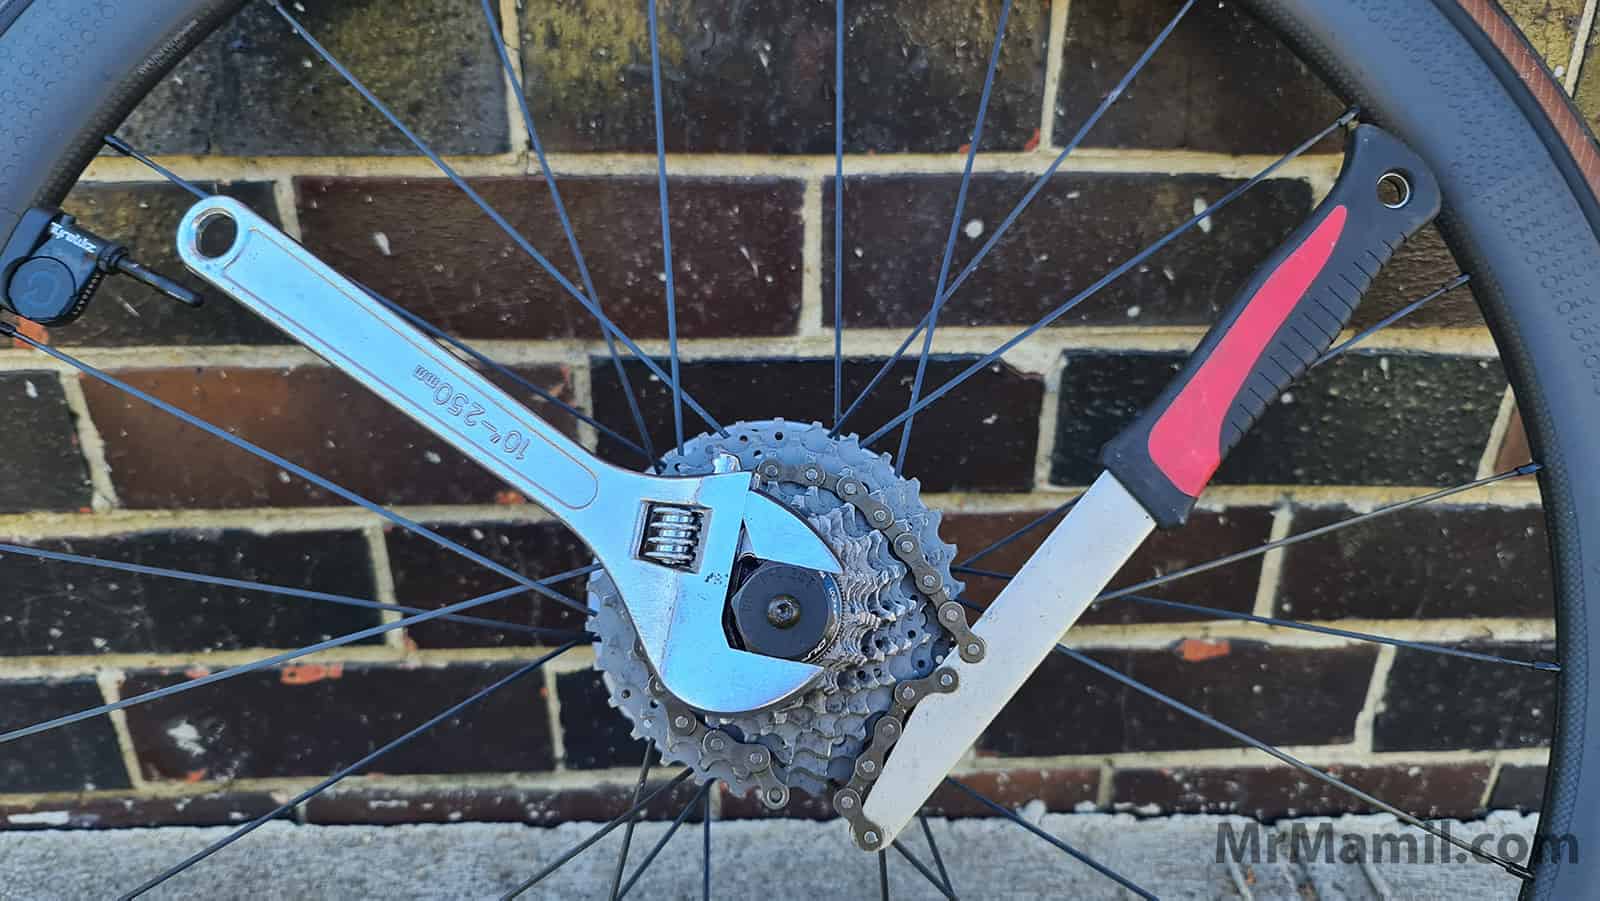 Place the wrench and chain whip at 2 or 10 o’clock position to unscrew the cassette lockring.